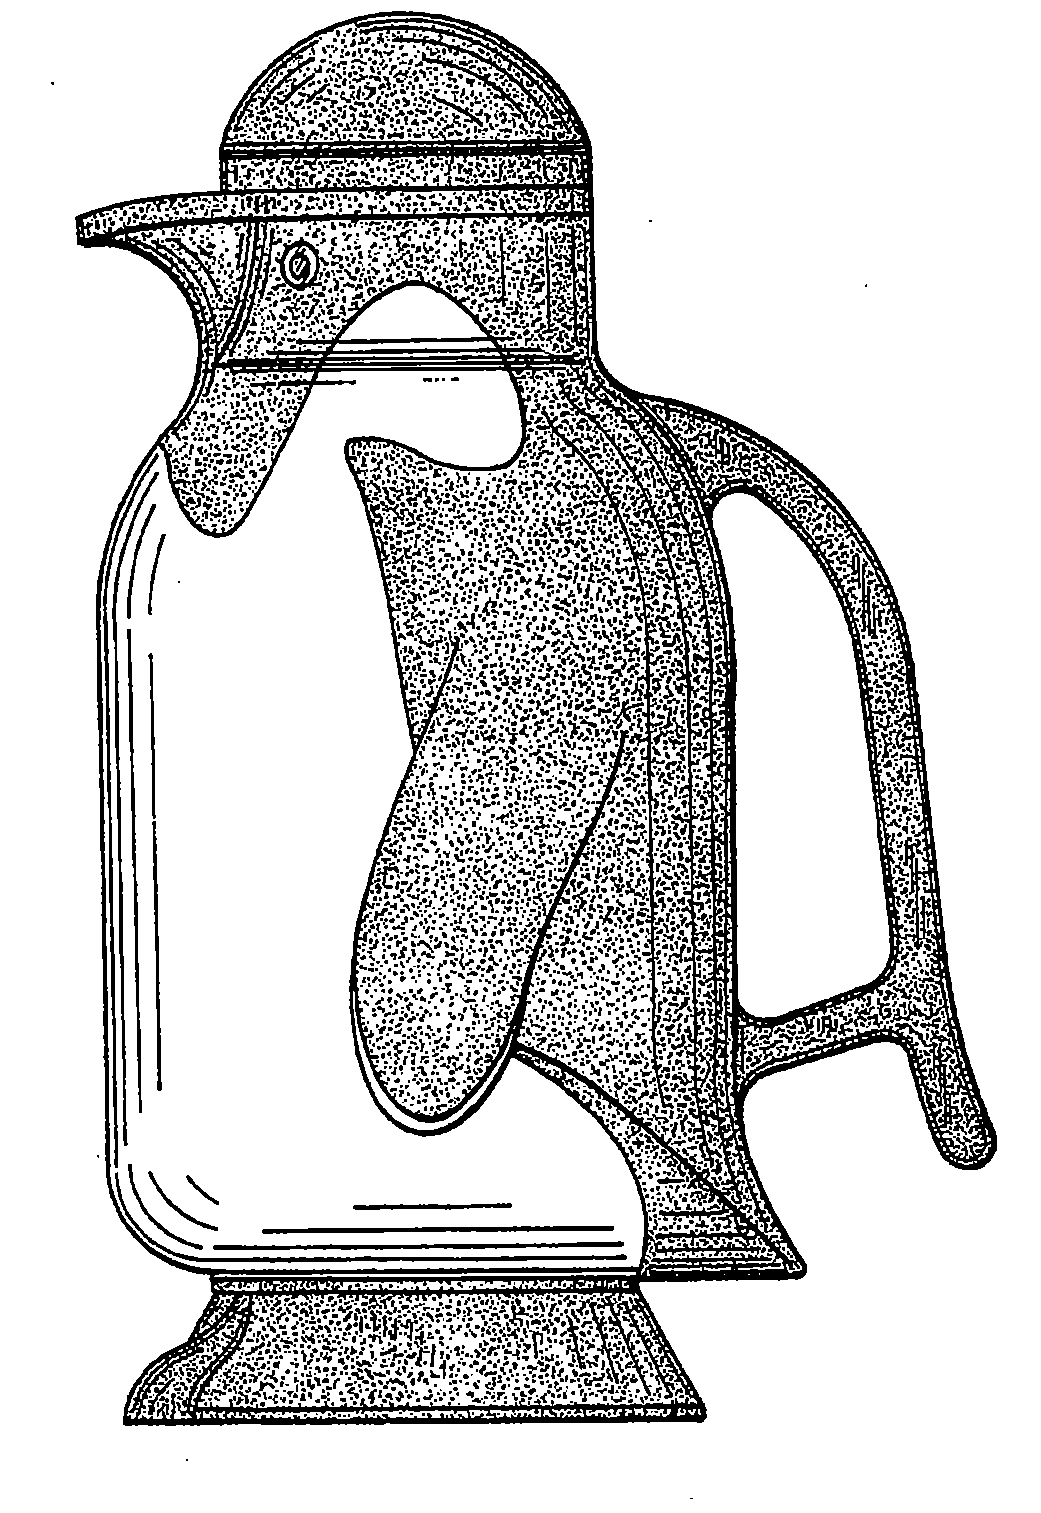 Example of a handheld design for serving a beverage witha simulative appearance and a rim-mounted pouring lip.
